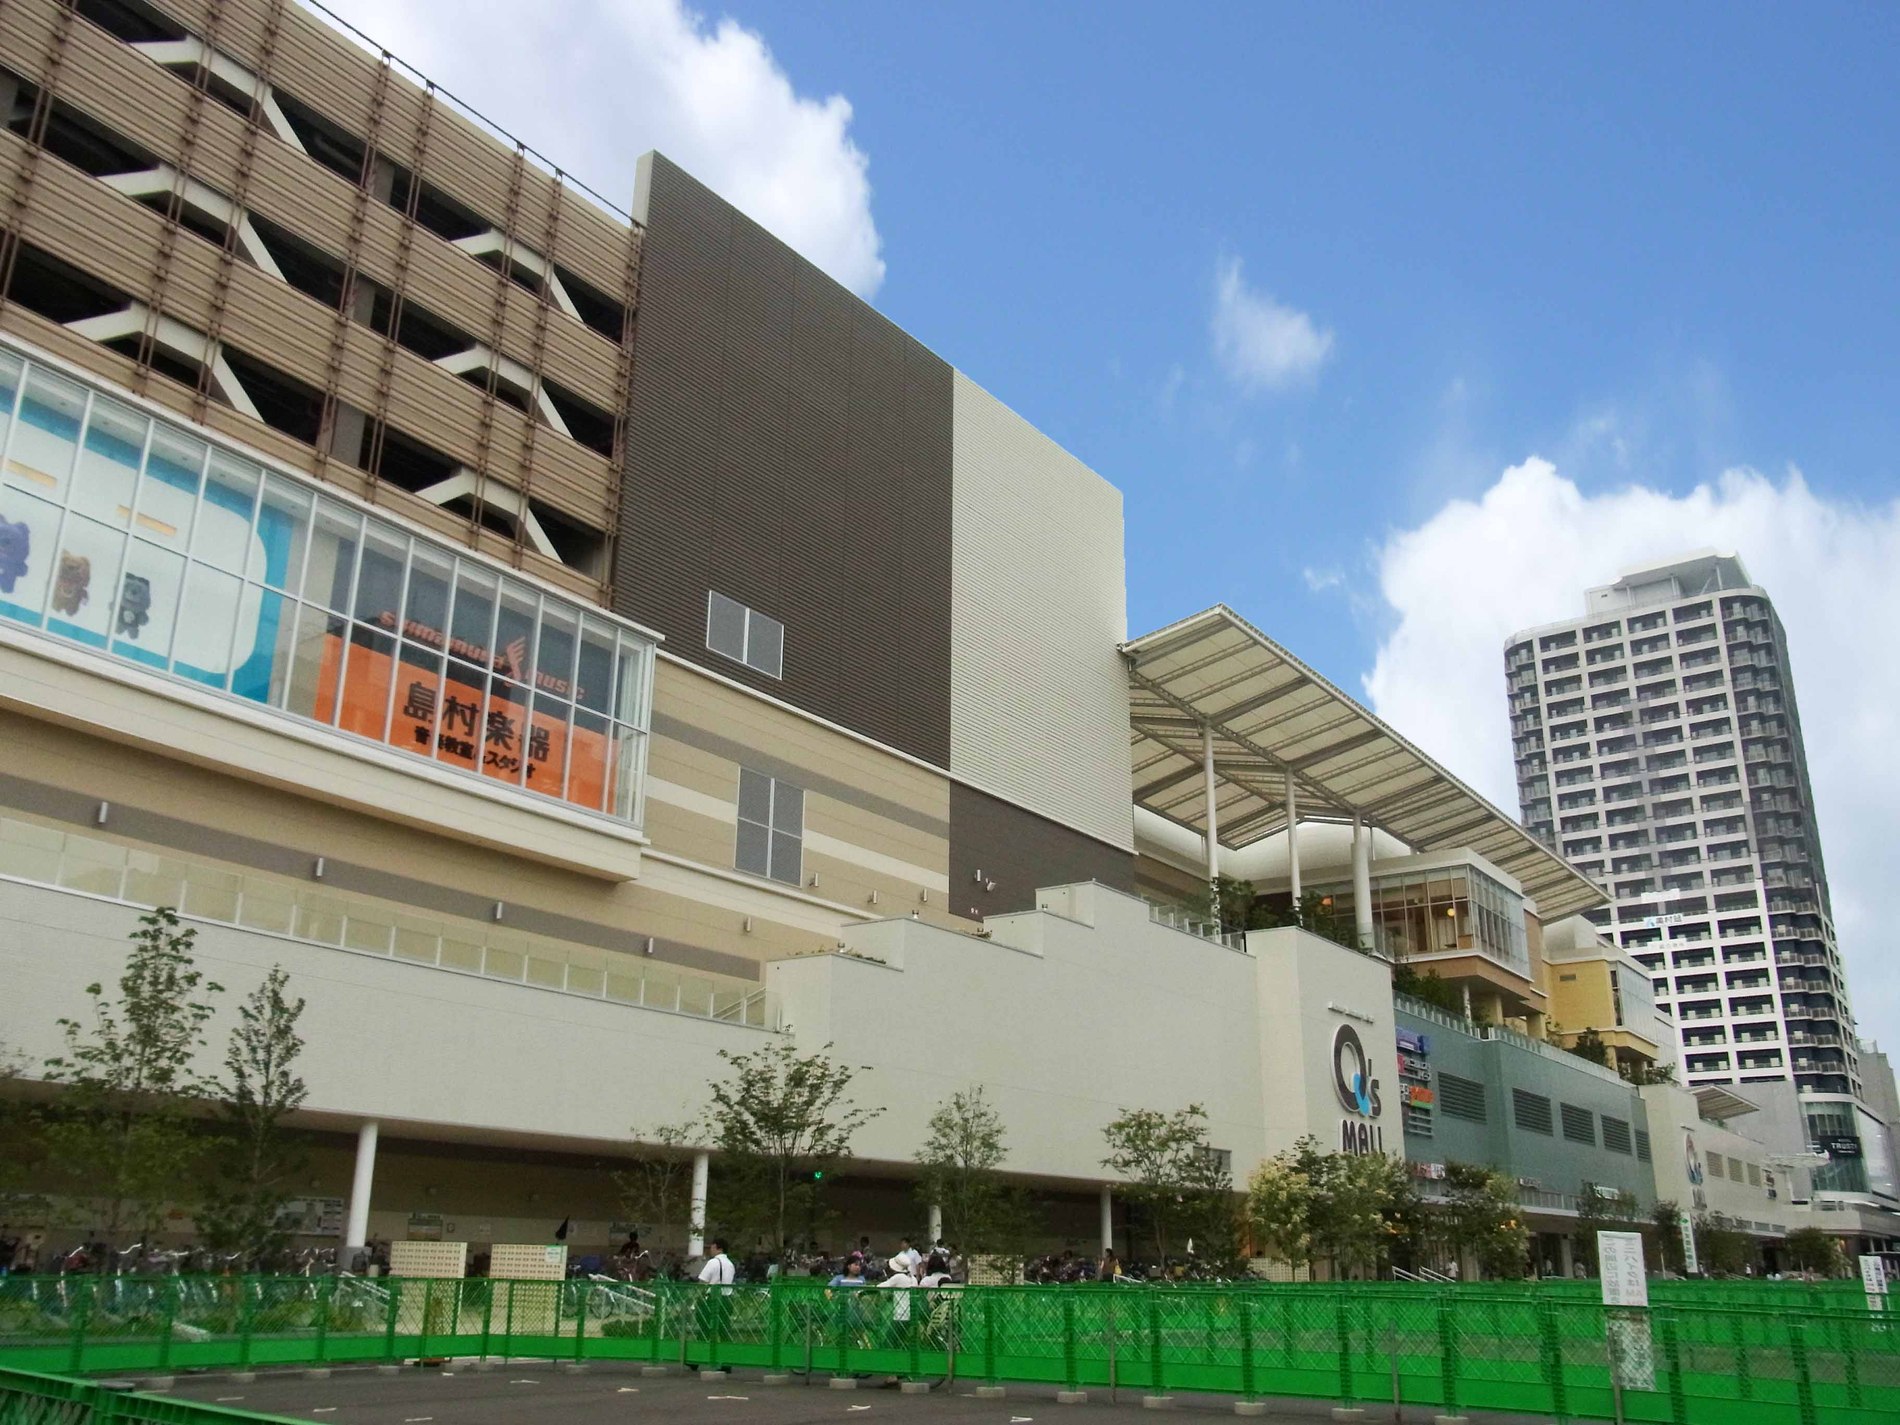 Shopping centre. Abeno large complex located in the 1200m Tennoji Ekimae Kyuzu until the mall to "Kyuzu Mall" is, 10:00 ~ 22:00 start the Ito-Yokado sales, Midori Denka and Tokyu Hands, etc., Flowing out the necessary facilities to start a new life!